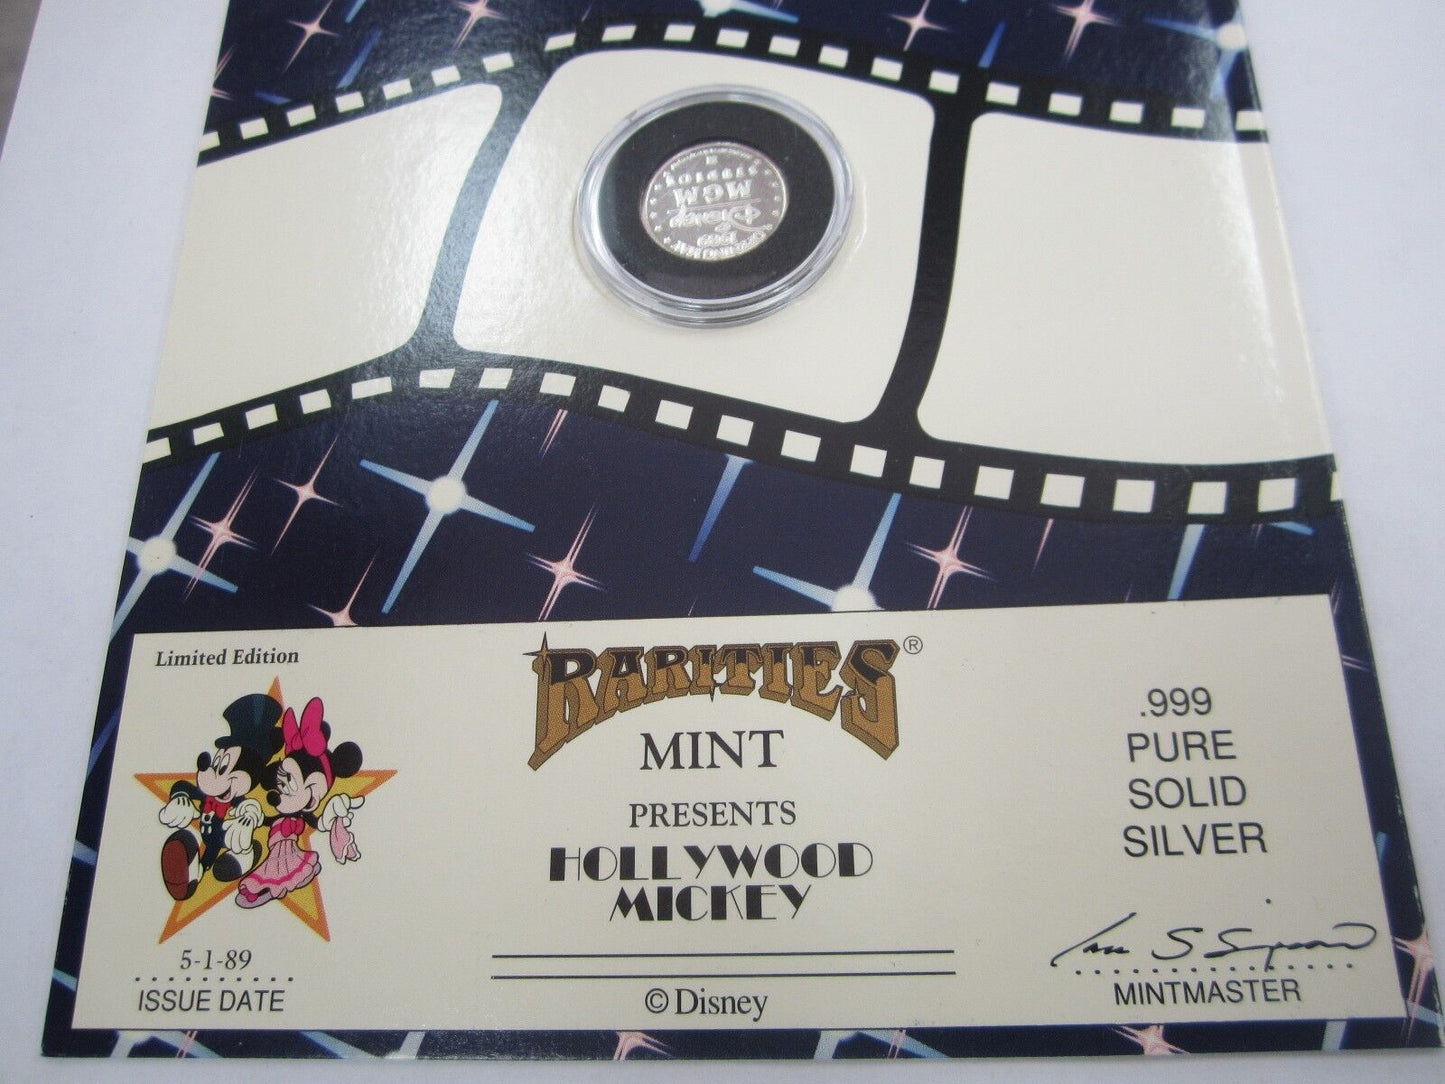 Disney Rarities Mint MGM STUDIOS 5/89 OPENING HOLLYWOOD MICKEY .999 Silver Coin!